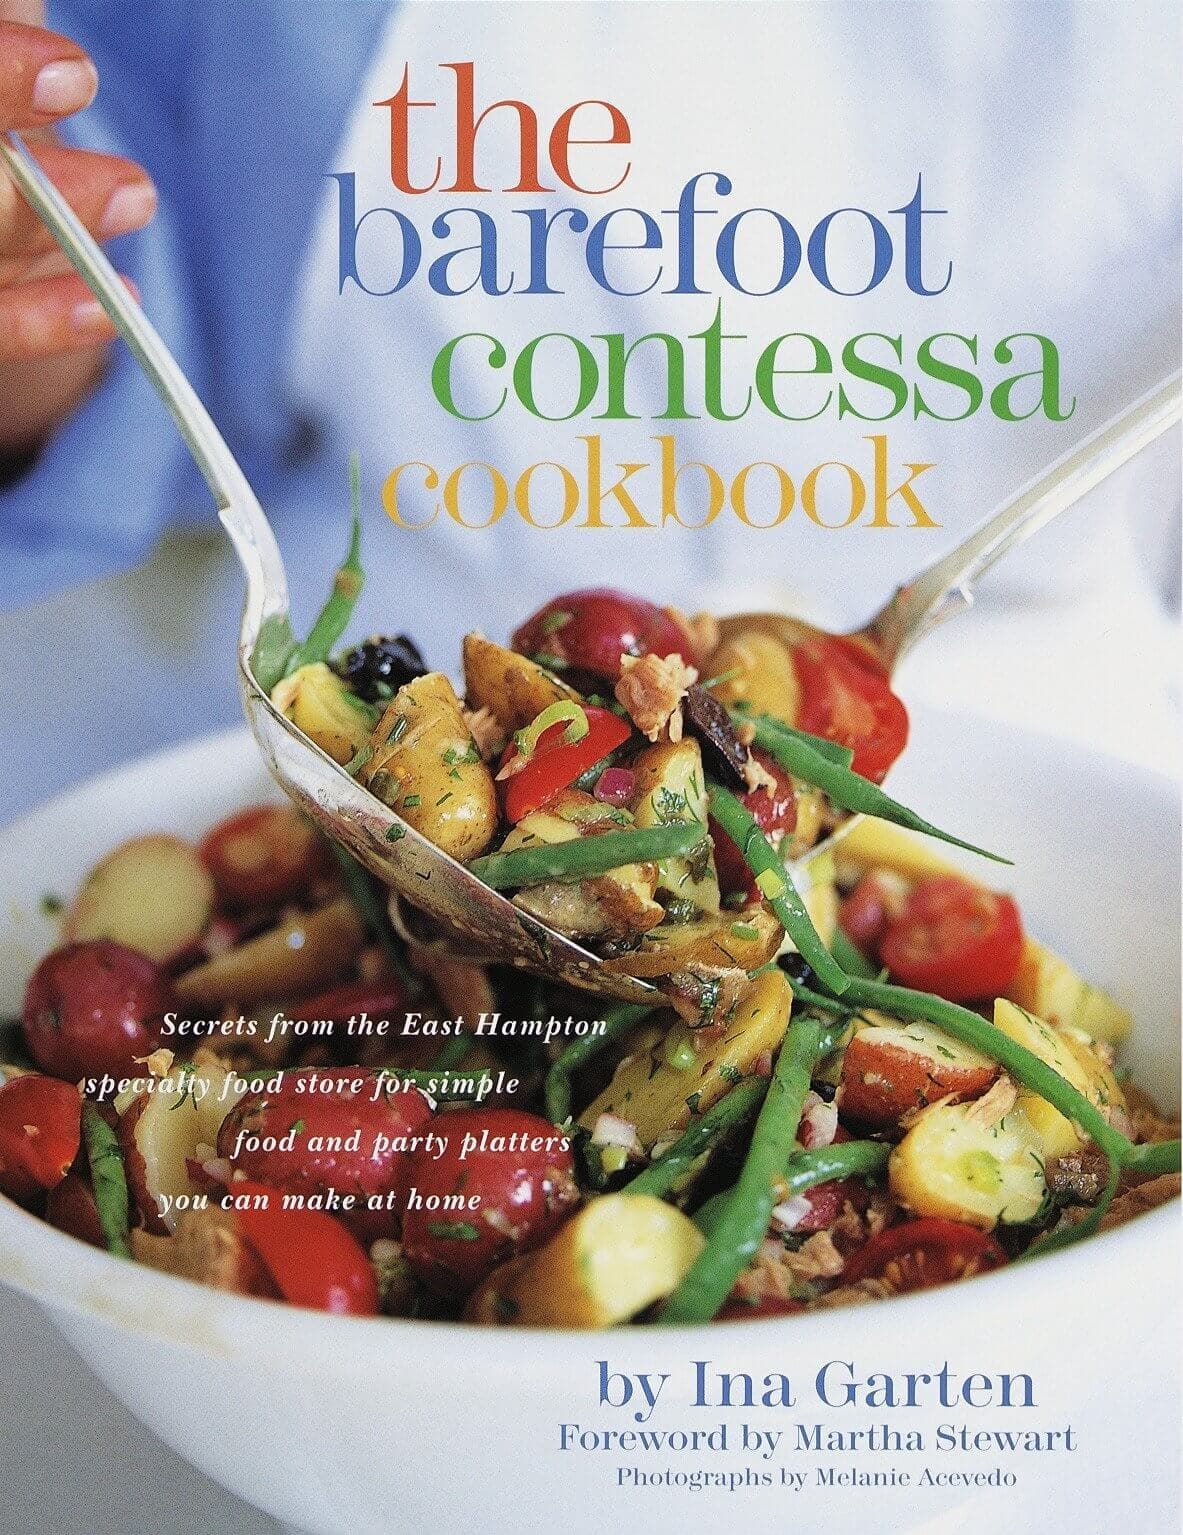 The Barefoot Contessa Cookbook - Cookies and Cups